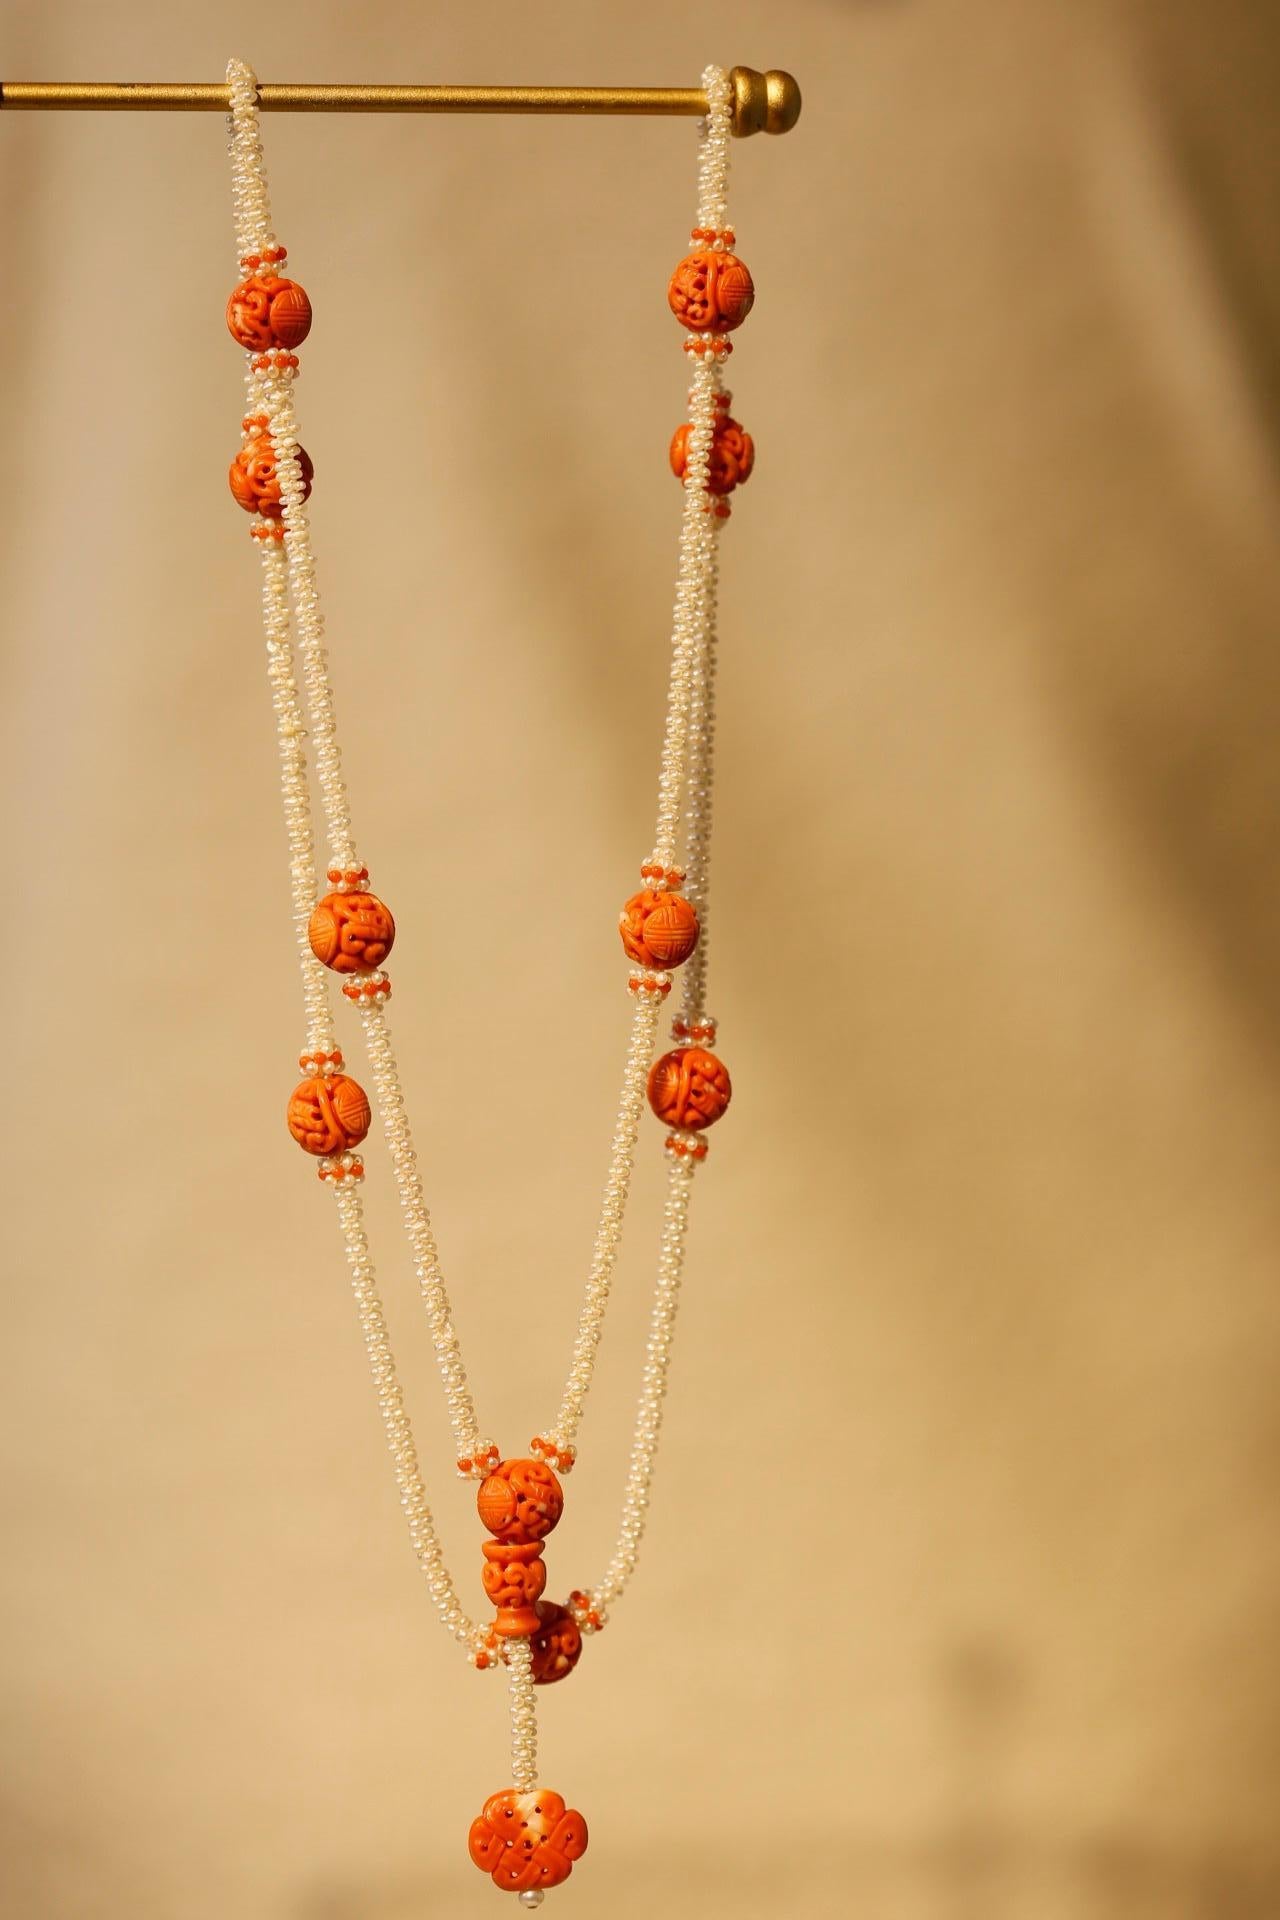 This necklace is made up of ten wonderfully intricate carved coral beads connected by seed pearls in a twisted rope design. There is a pendant of coral, carved in the shape of a stylized Chinese knot, suspended below one bead.

Carved coral of this